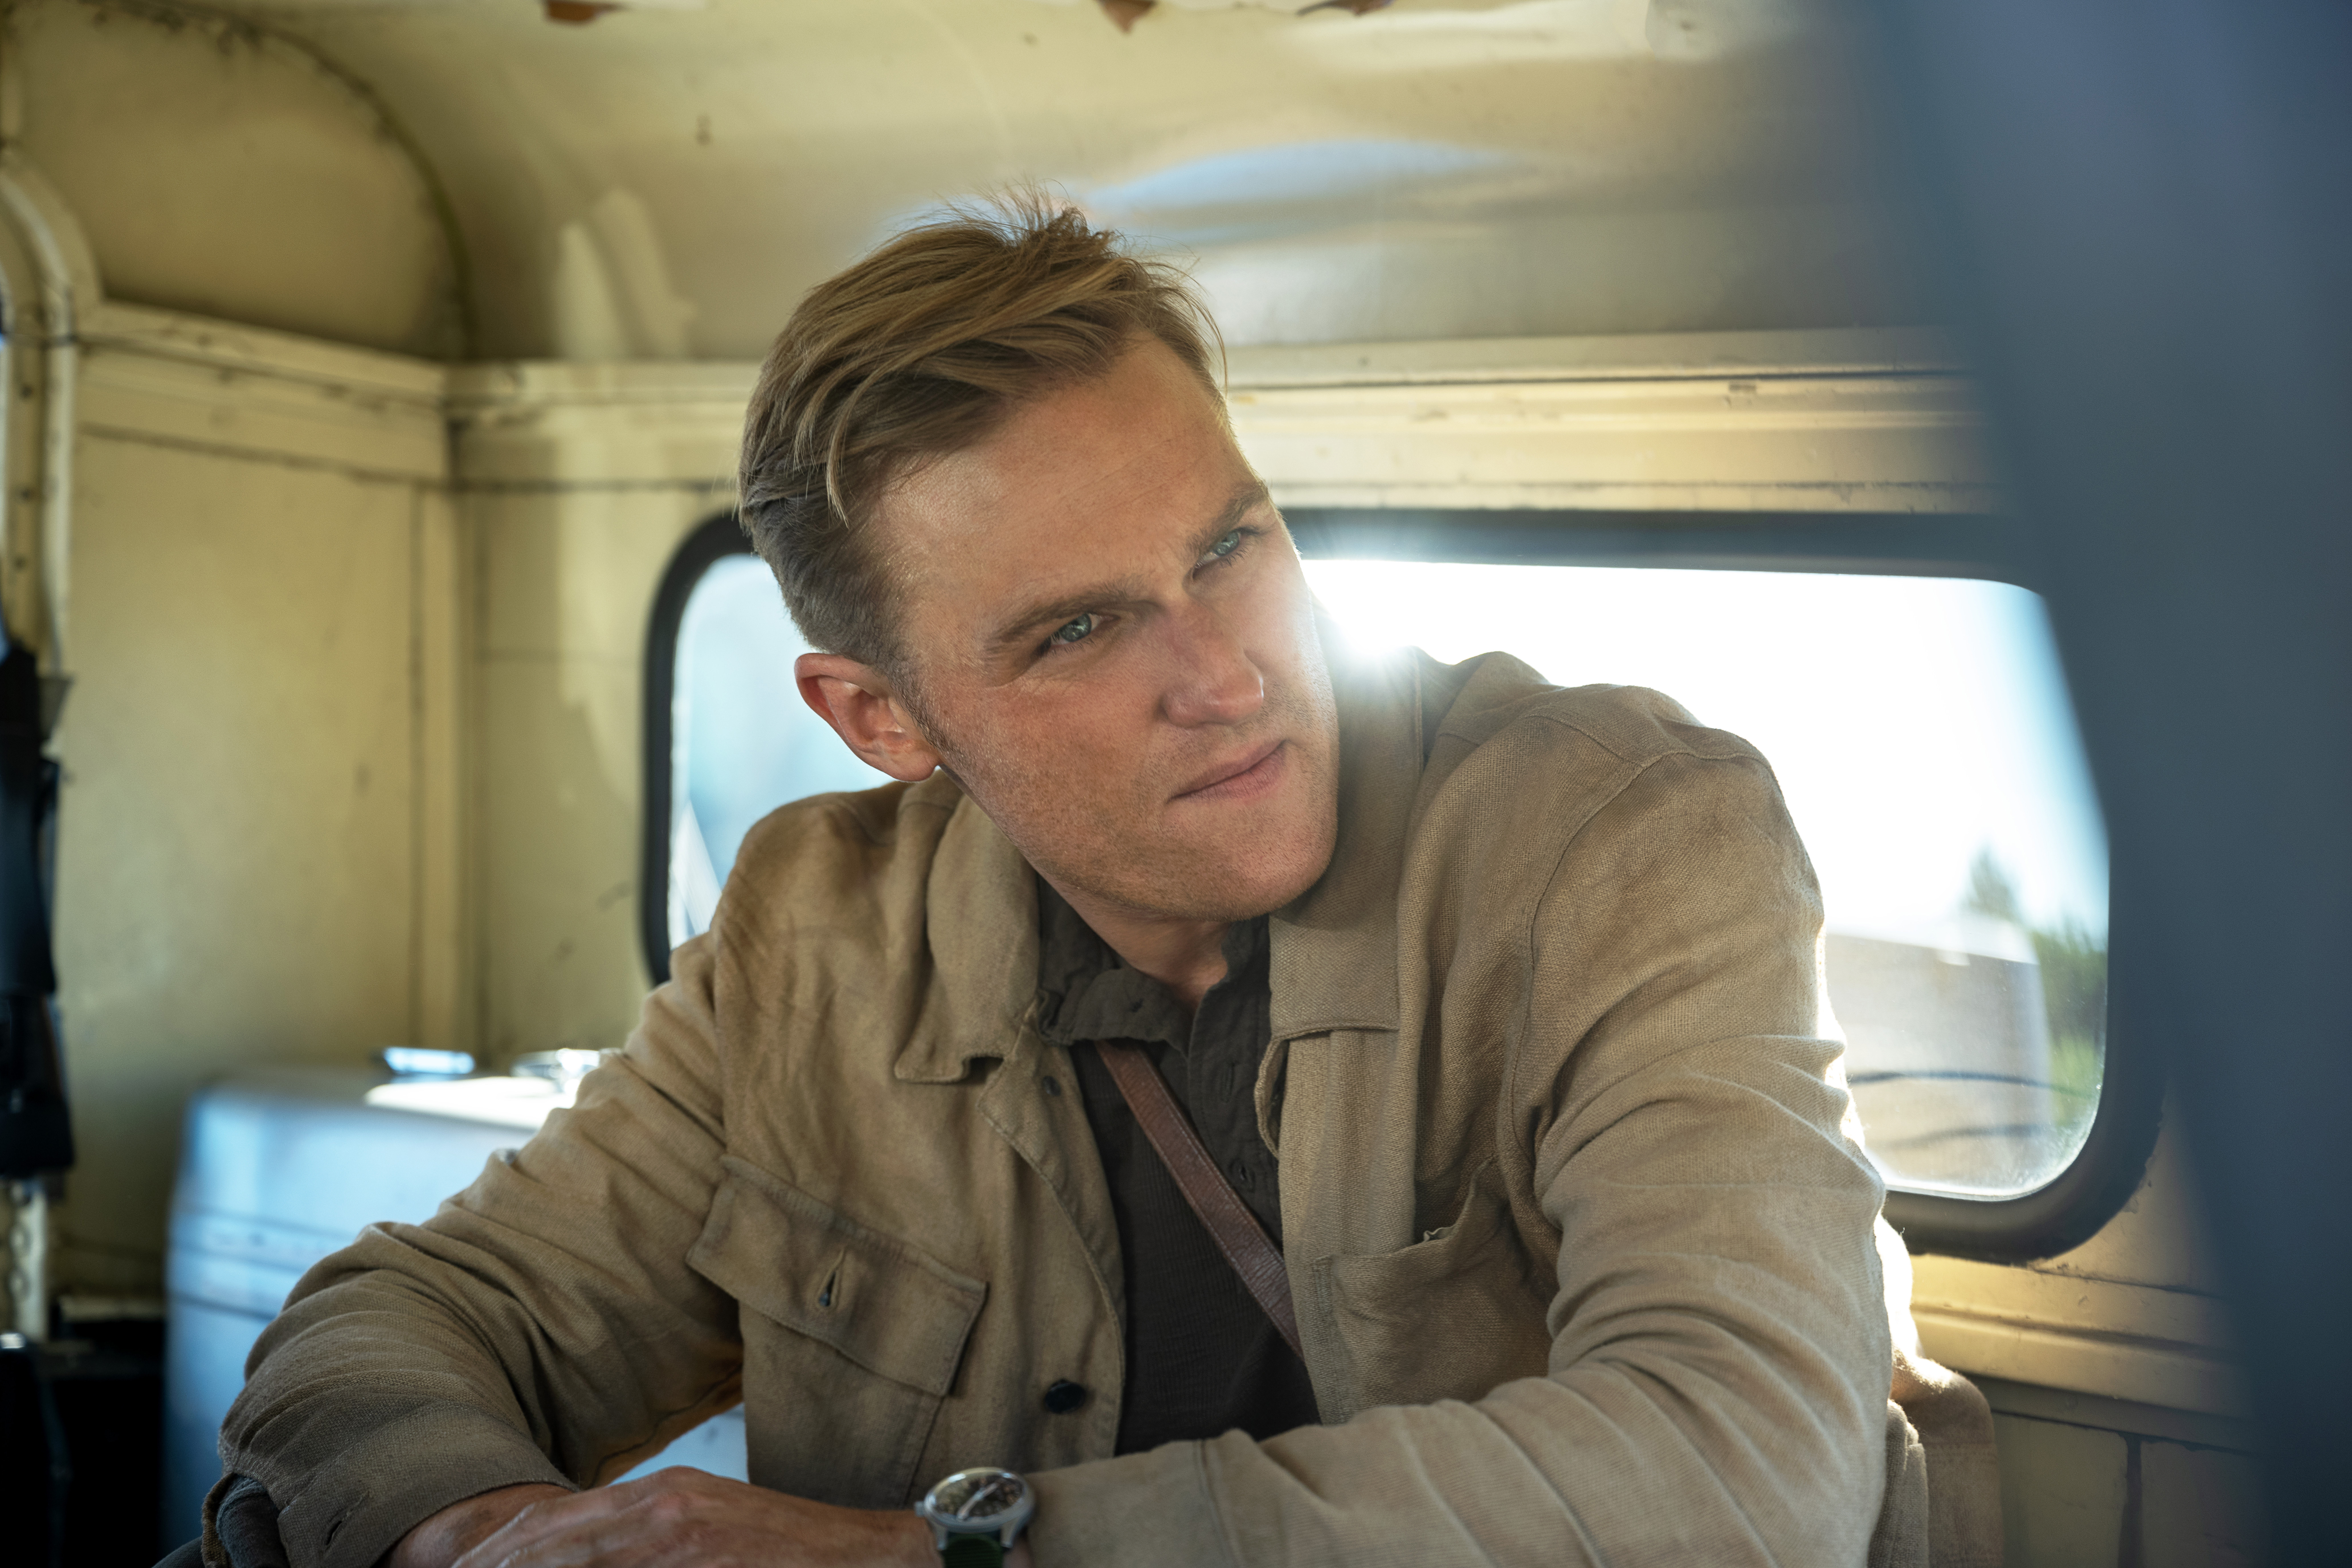 Wyatt Russell as Lee Shawm sitting in the back of a van looking softly interested in something